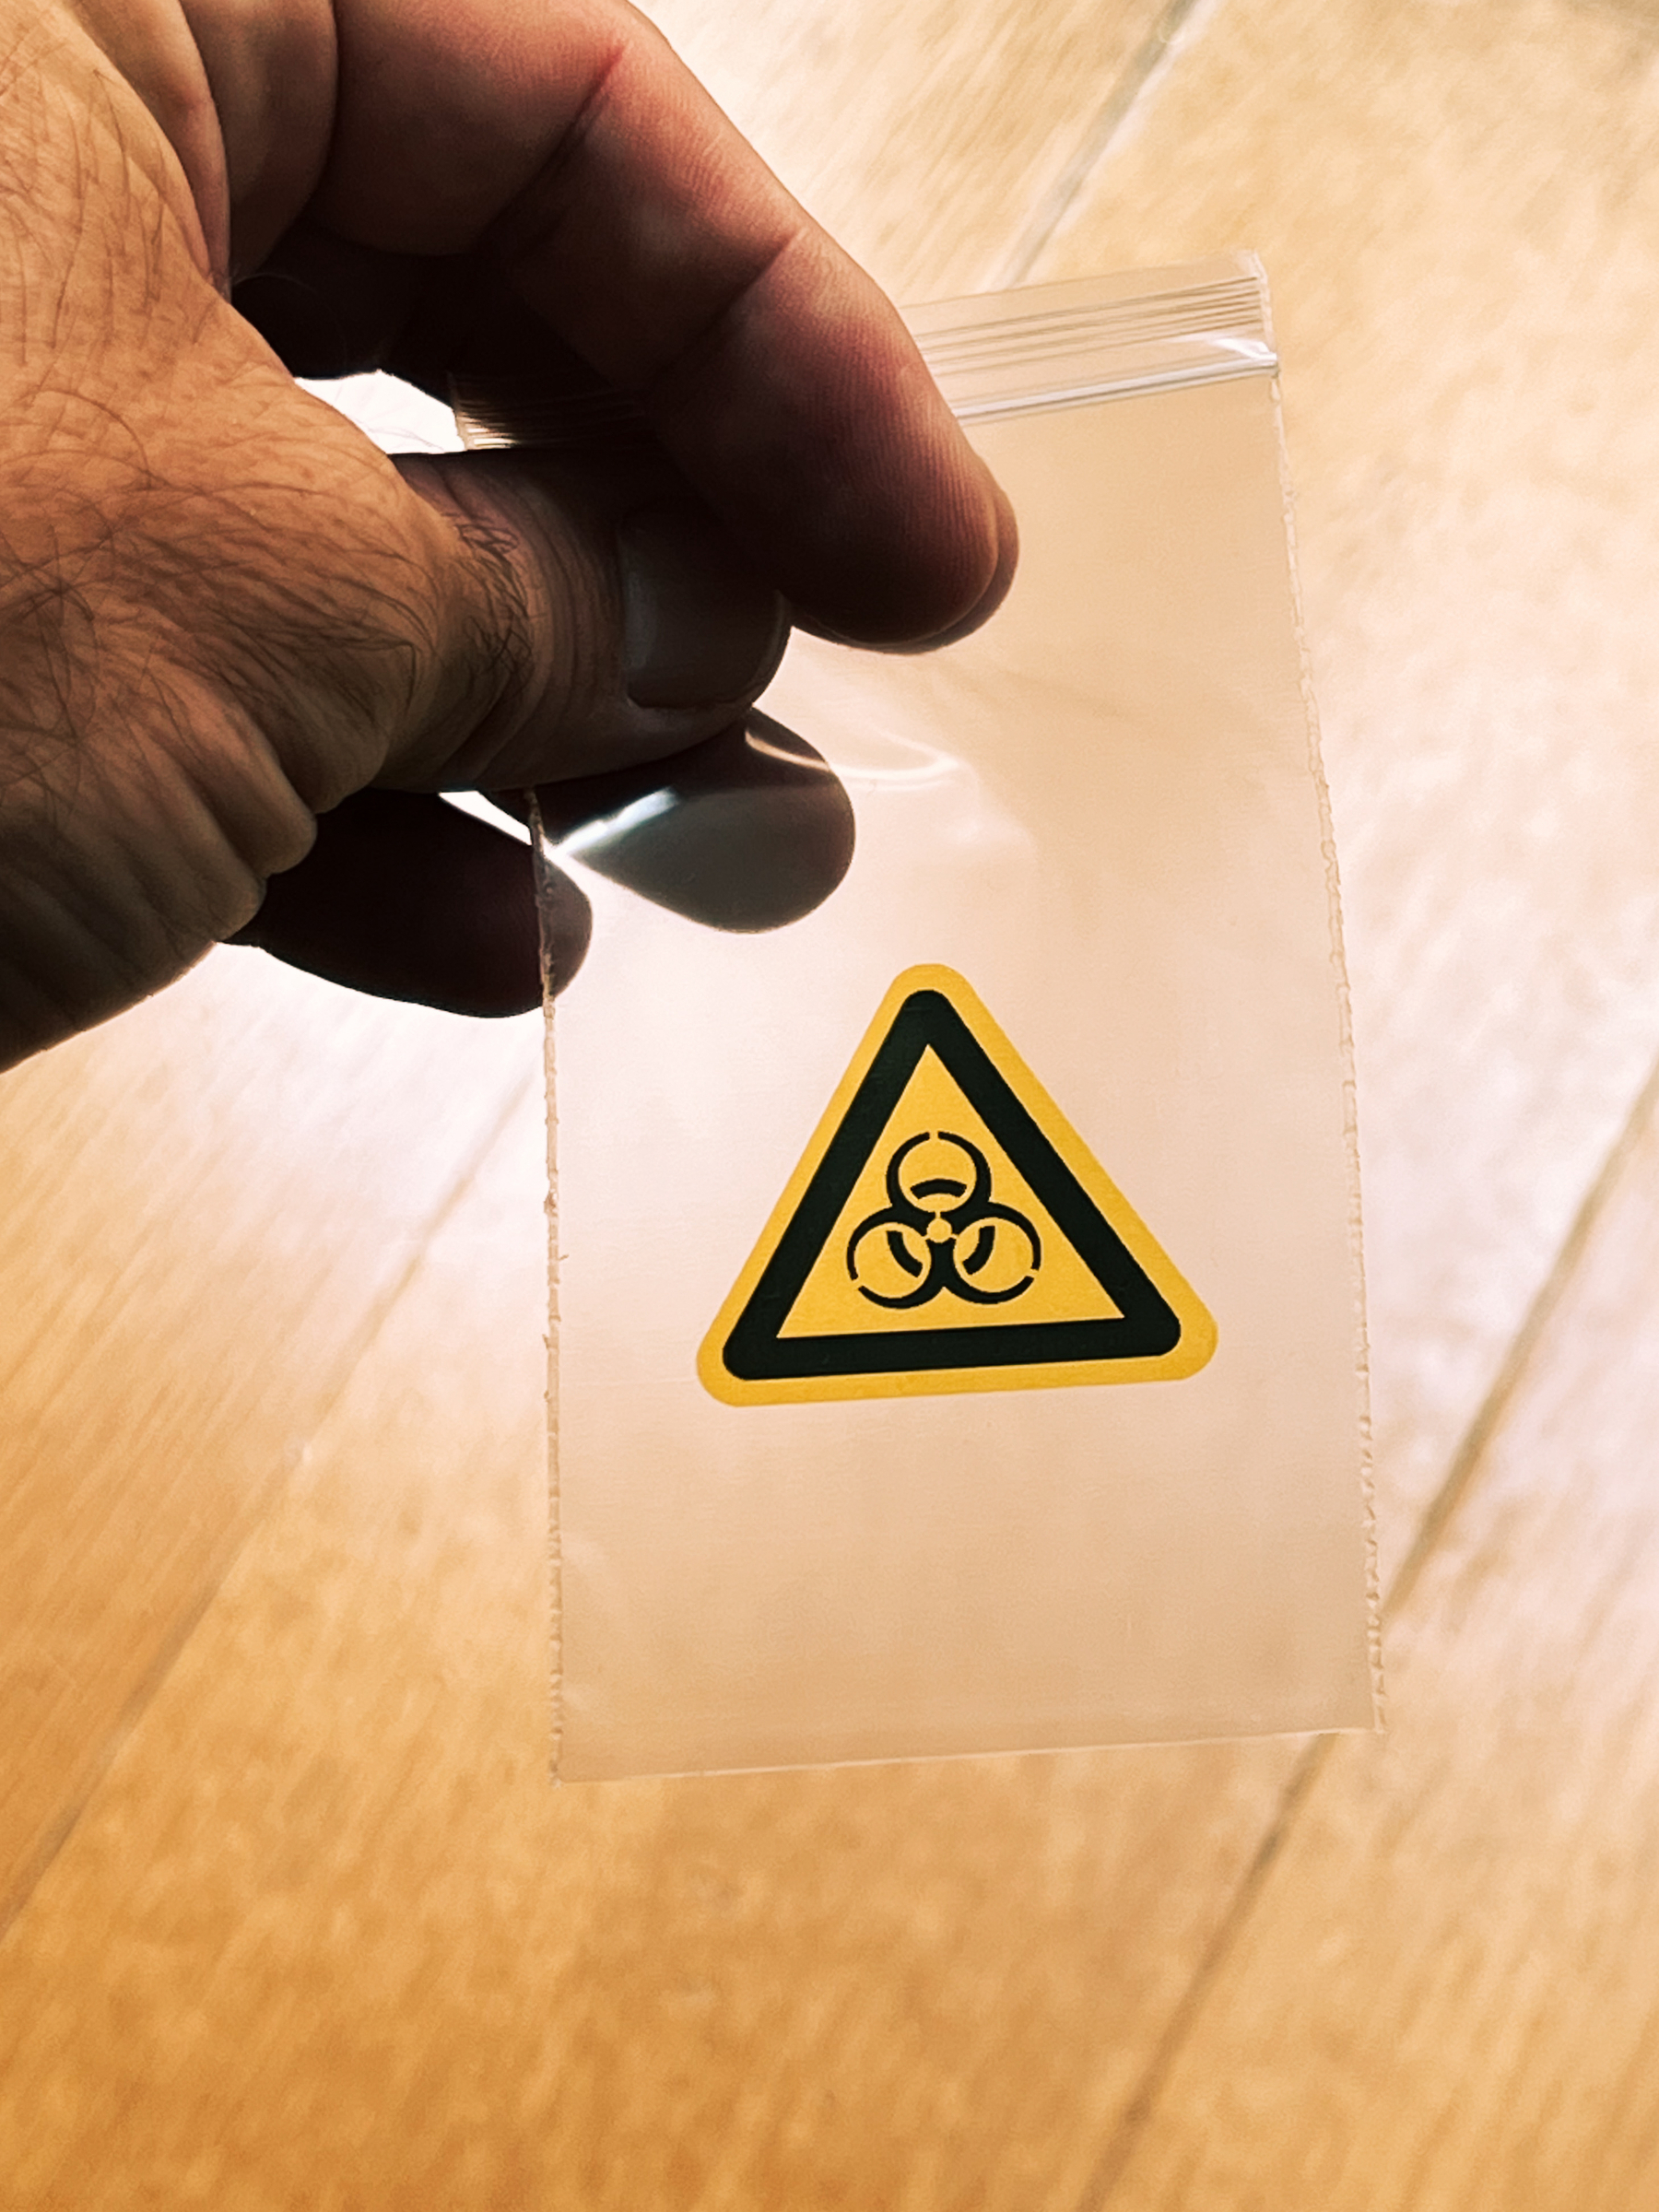 A hand holds a small plastic bag with a sign for hazardous materials.